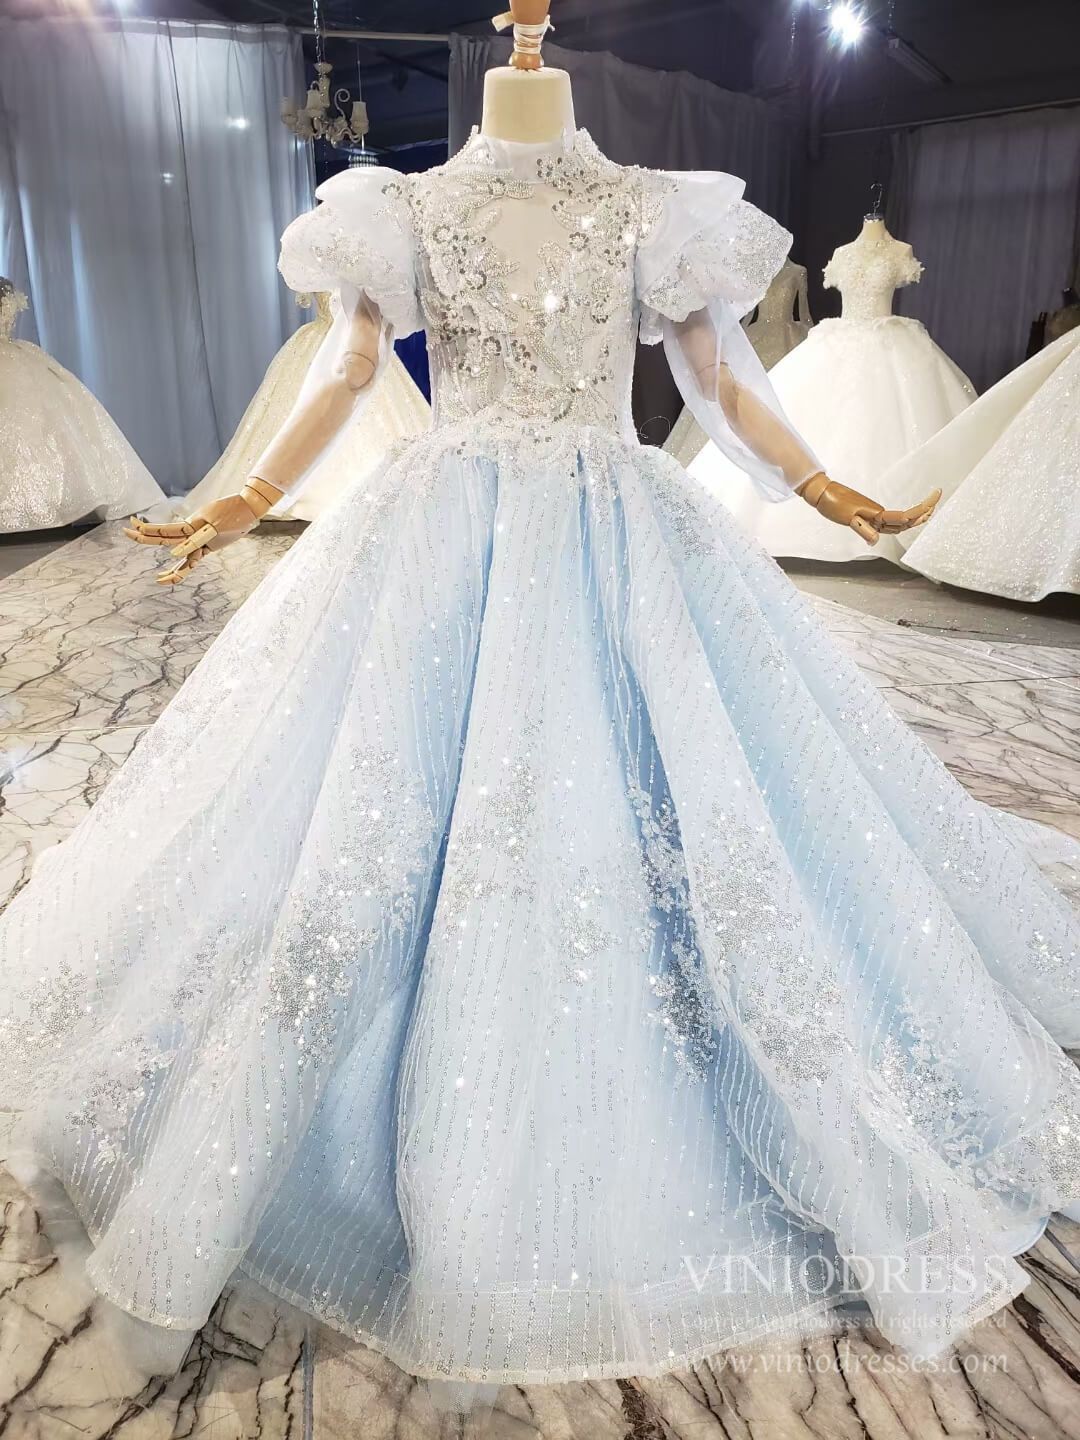 Find Your Fairytale Princess Wedding Dress Our Favorite Gowns